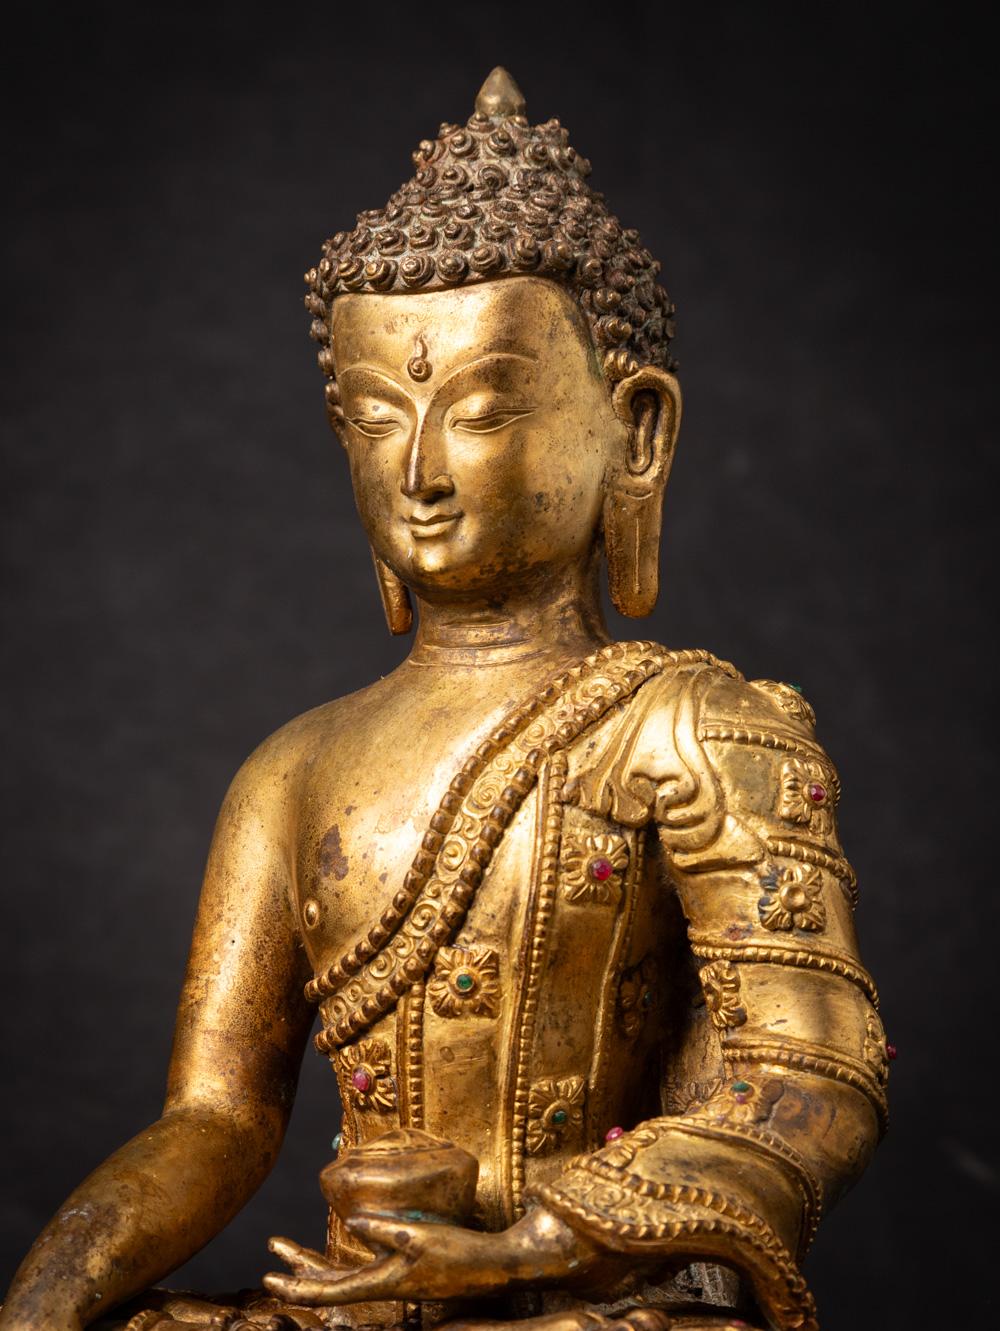 Mid-20th century old bronze Nepali Buddha statue i20.5nlaid with real gem stones 3